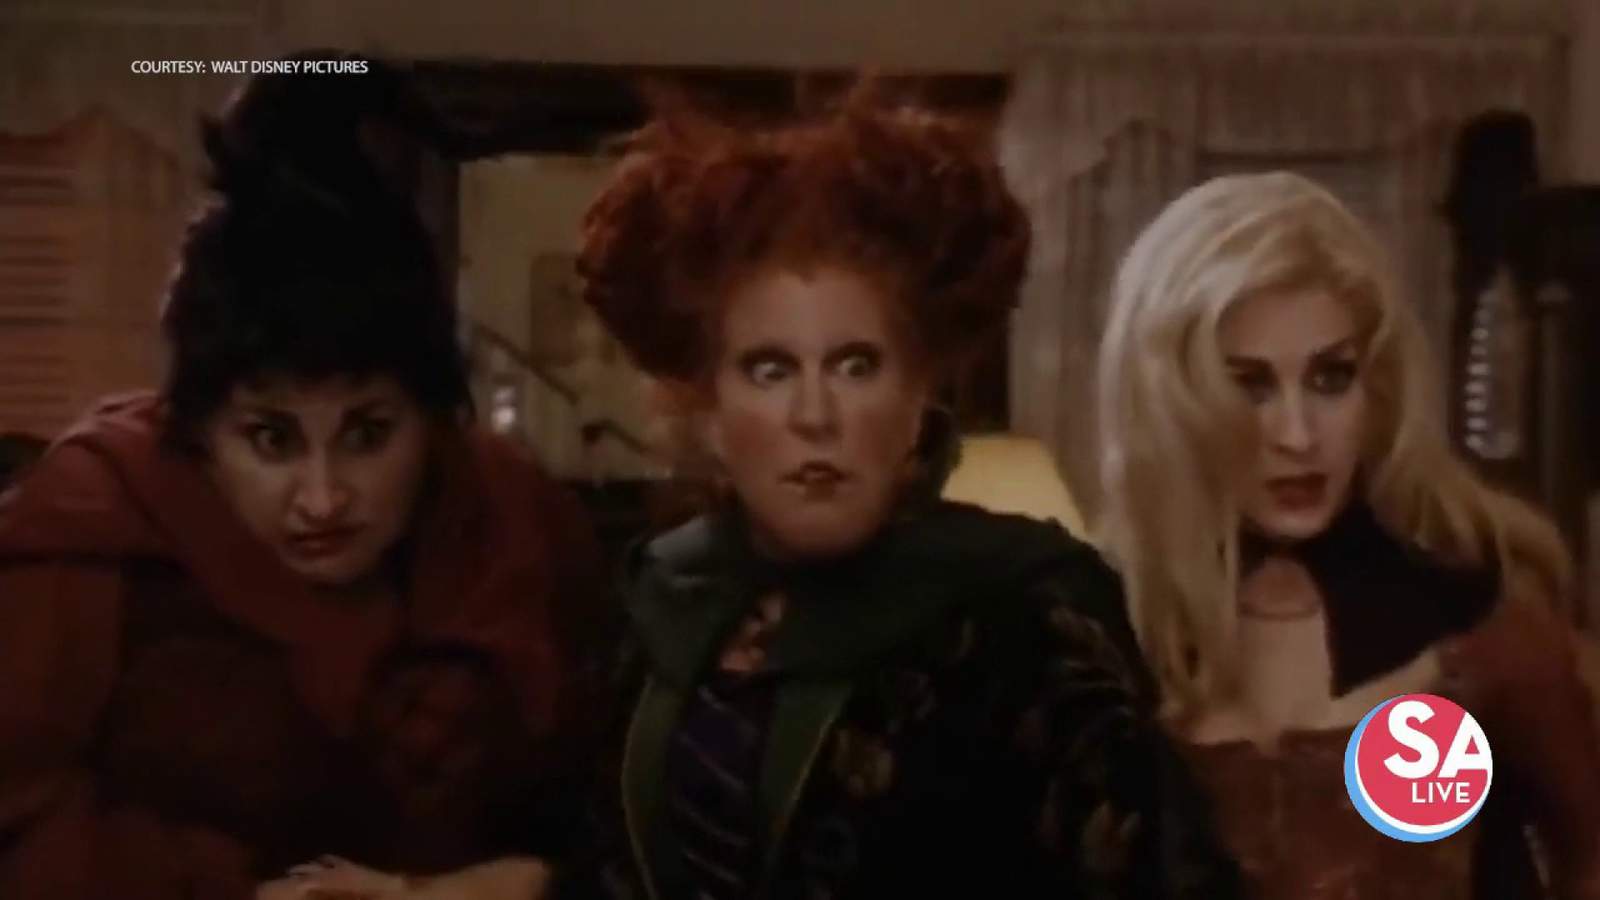 Celebrity Chat: behind-the-scenes stories from ‘Hocus Pocus’